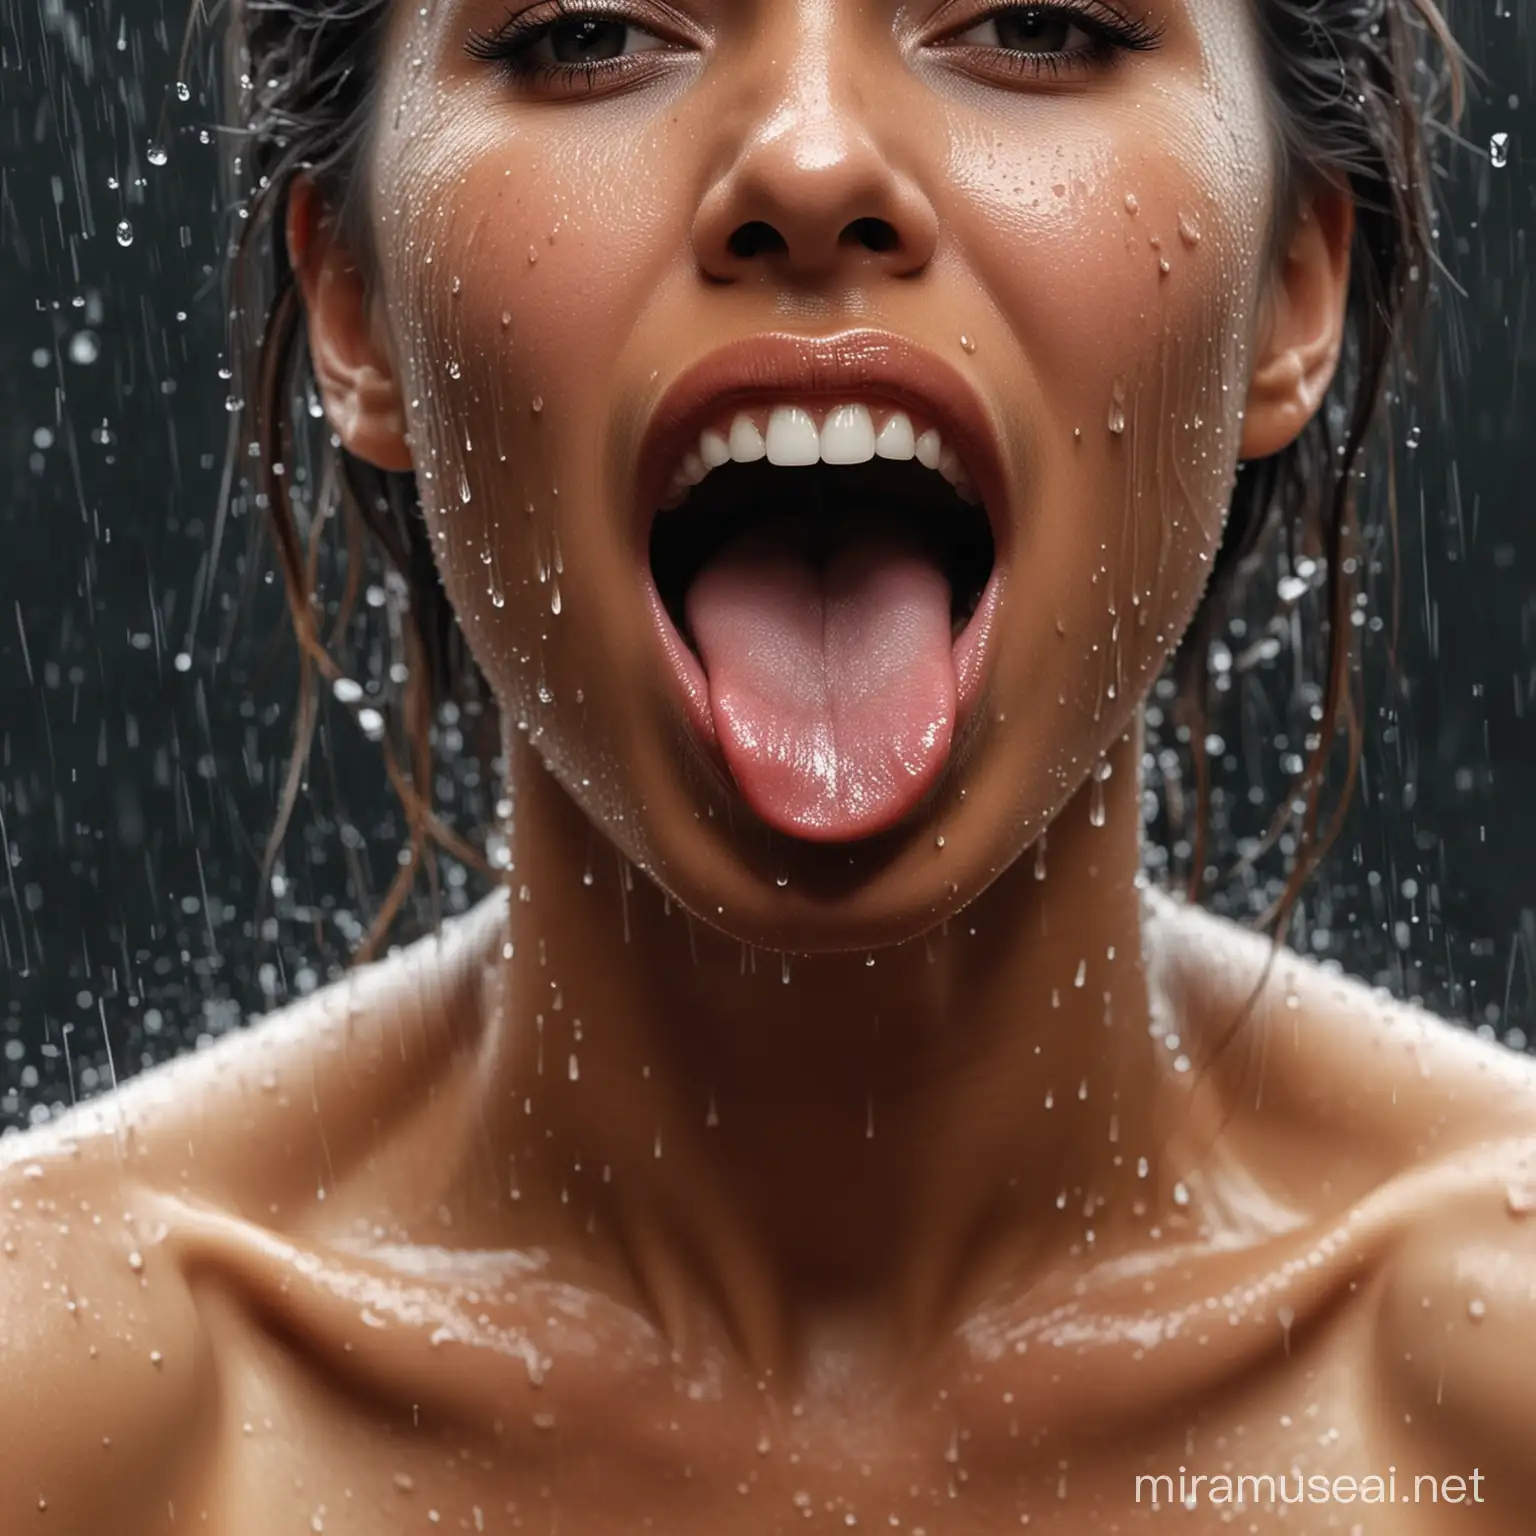 with a human face With her Tongue out. It features an outdoor portrait of a girl with a woman's face, embodying the concept of "Woman Rain." The artwork is a blend of human and animal characteristics, creating a unique and creative visual.She is a nude art model.Black woman beautiful face is shown.  The woman's body parts such as chest, thigh, stomach, and abdomen are visible.painterly smooth, extremely sharp detail, finely tuned detail, 8 k, ultra sharp focus, illustration, illustration, art by Ayami Kojima Beautiful Thick Black